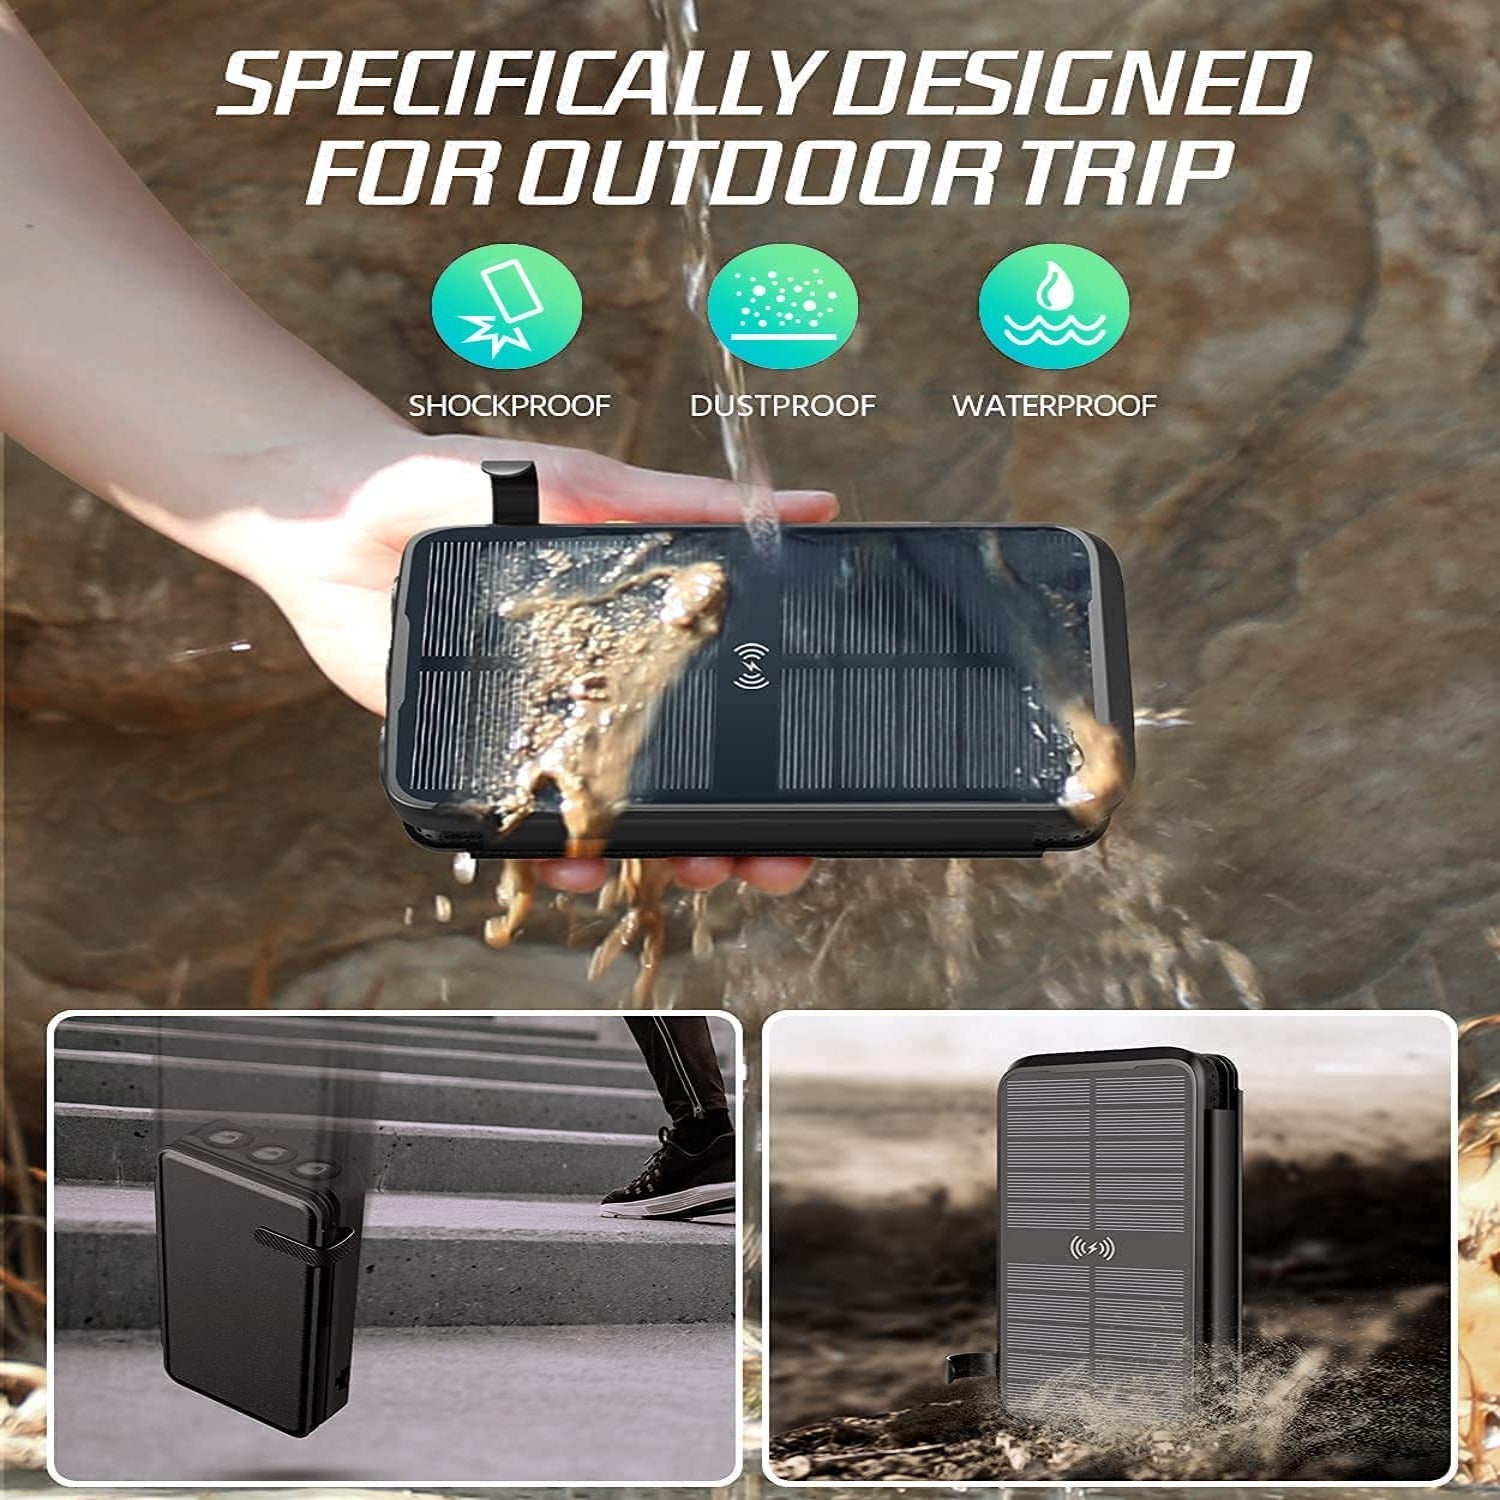 Portable Solar Power Bank Charger 35000mAh for Phone, Watch, Earphone